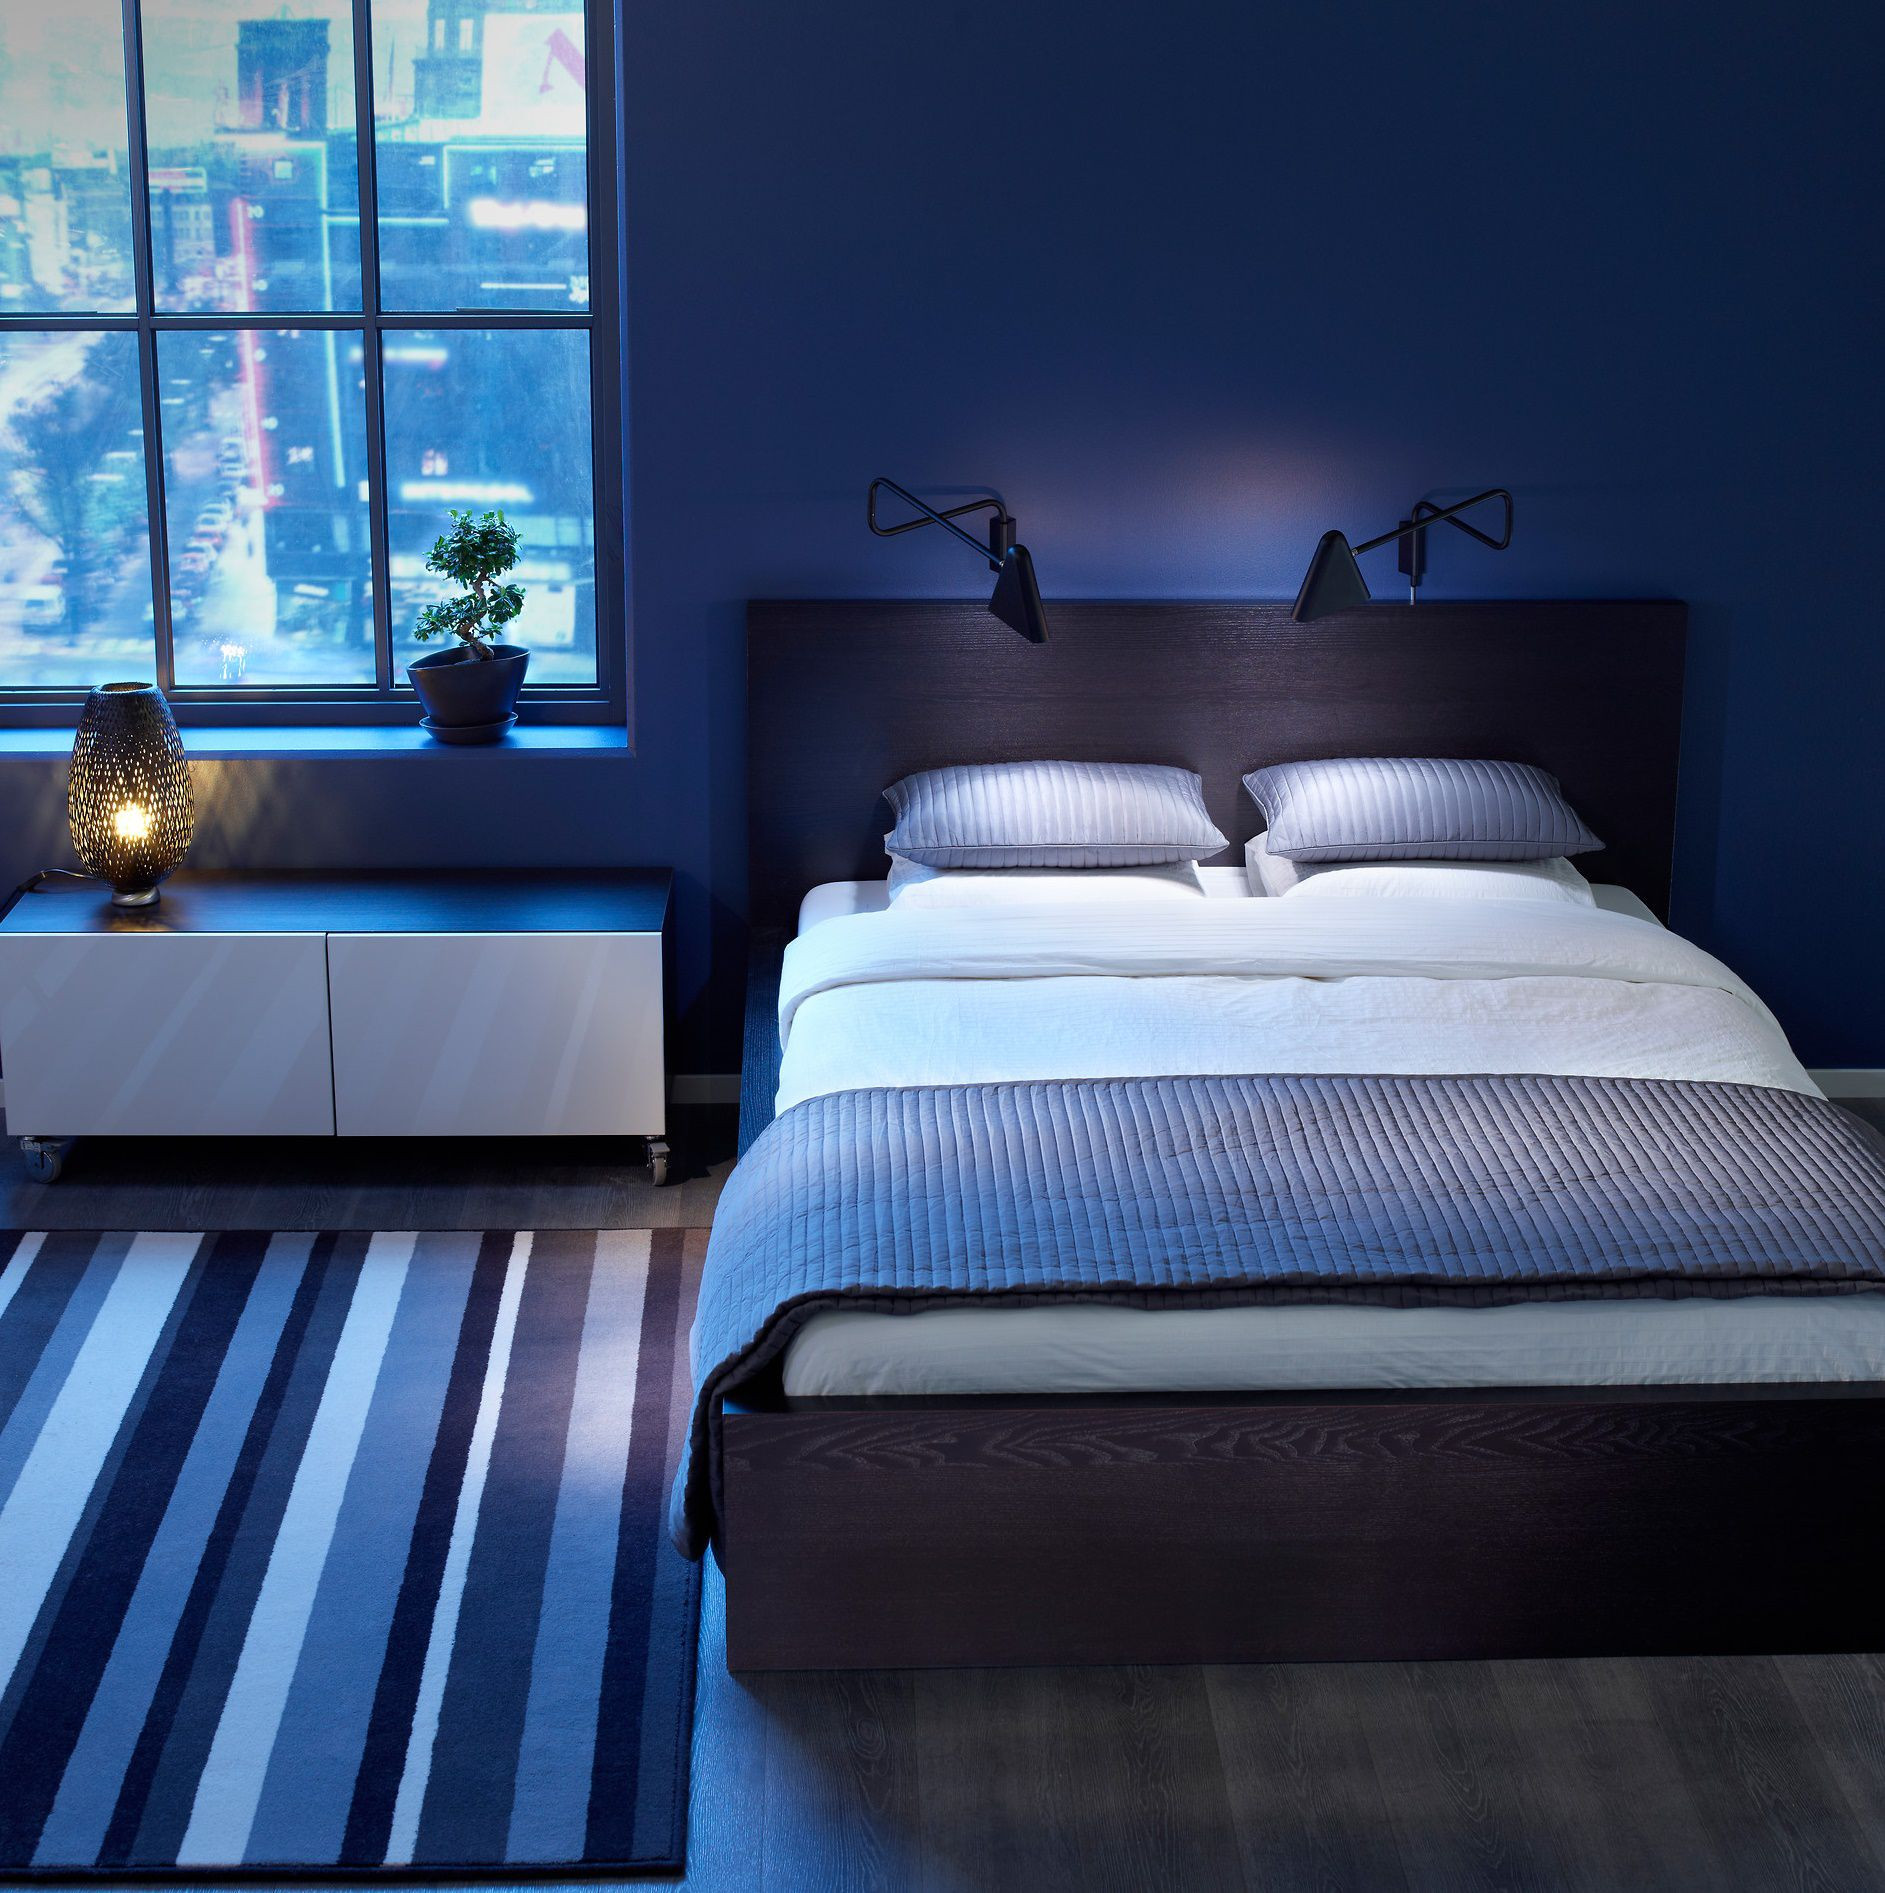 Blue Bedroom Paint Color
 How to Apply the Best Bedroom Wall Colors to Bring Happy